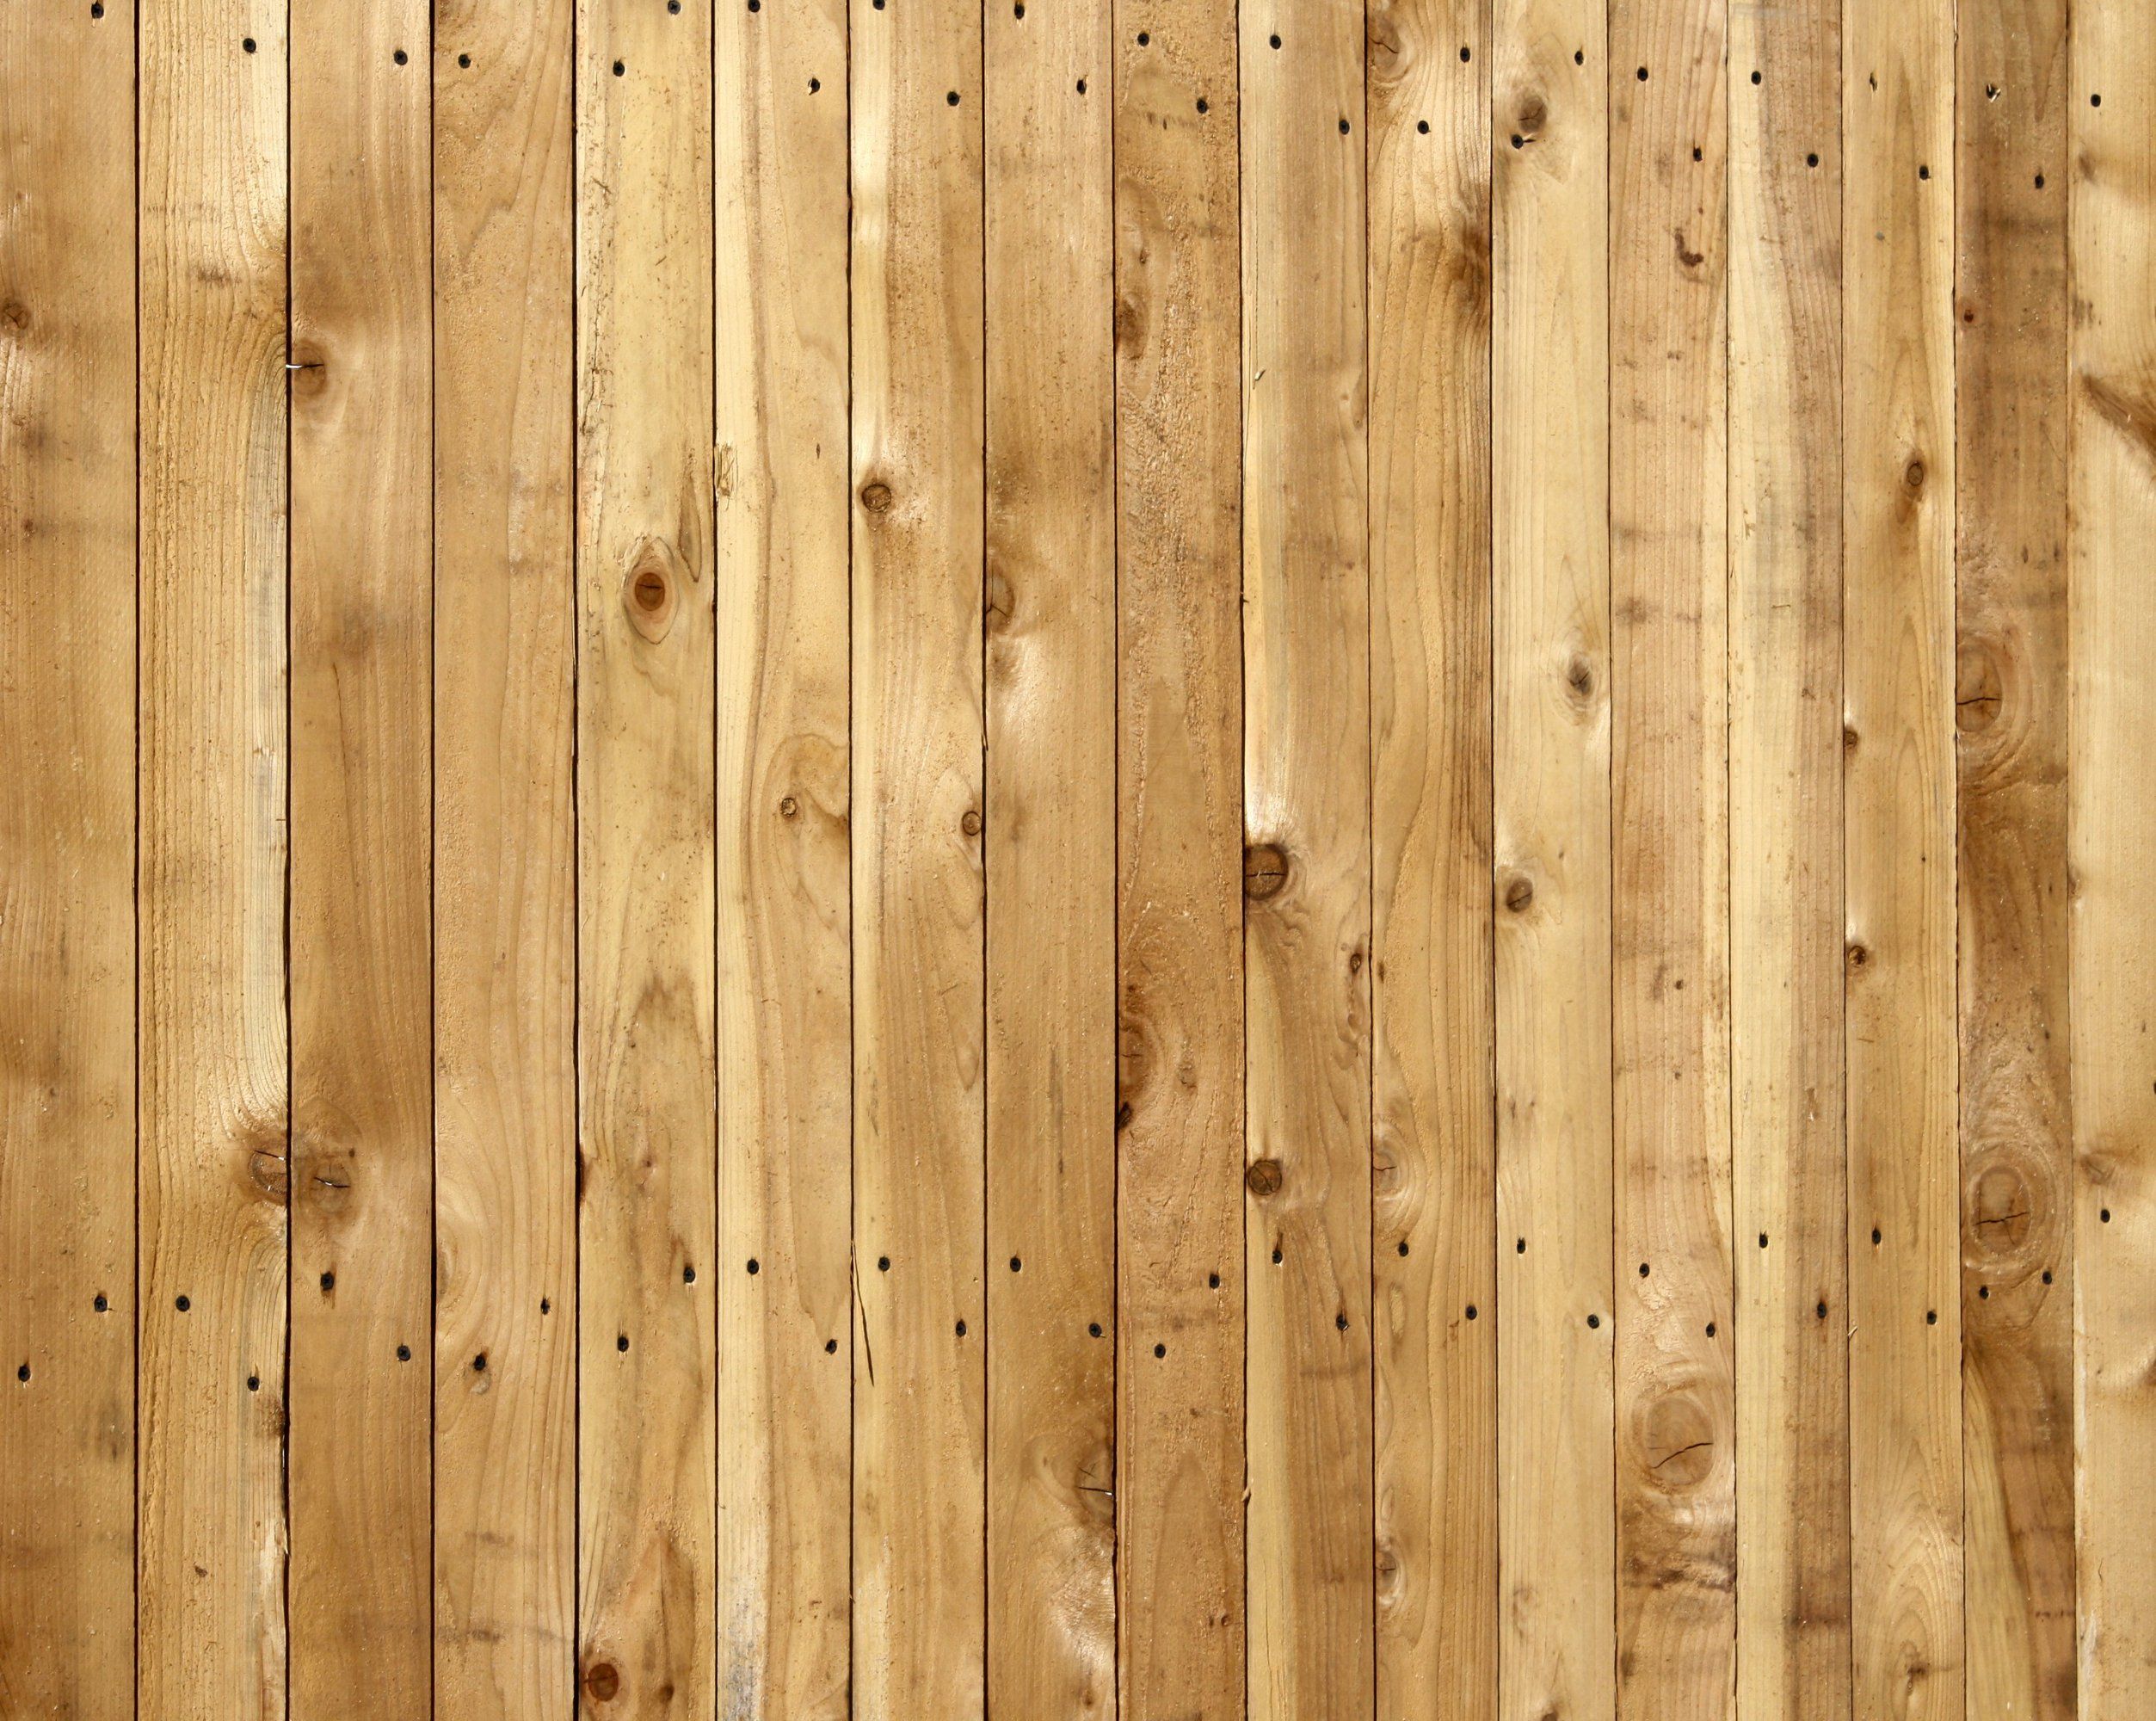 Download texture wooden boards texture background, wood